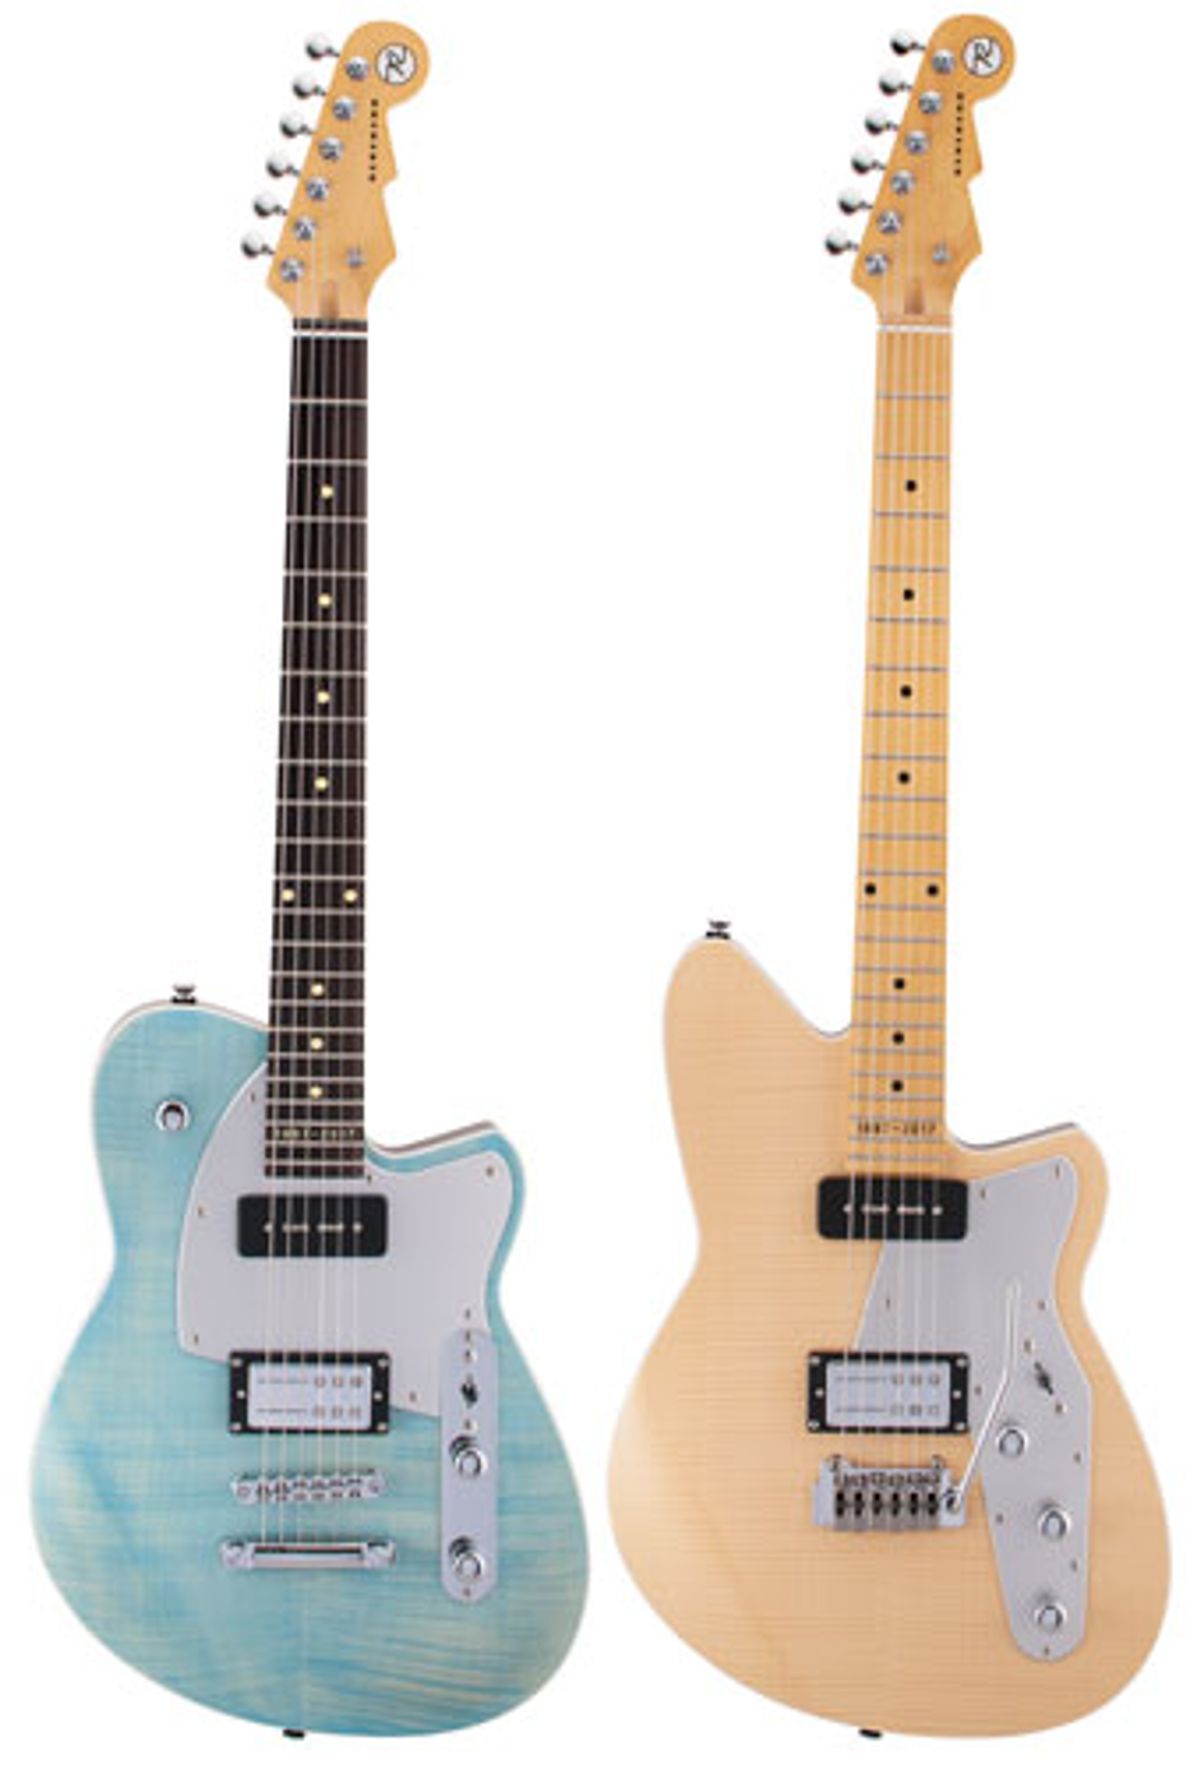 Reverend Celebrates 20th Anniversary with New Double Agent Models